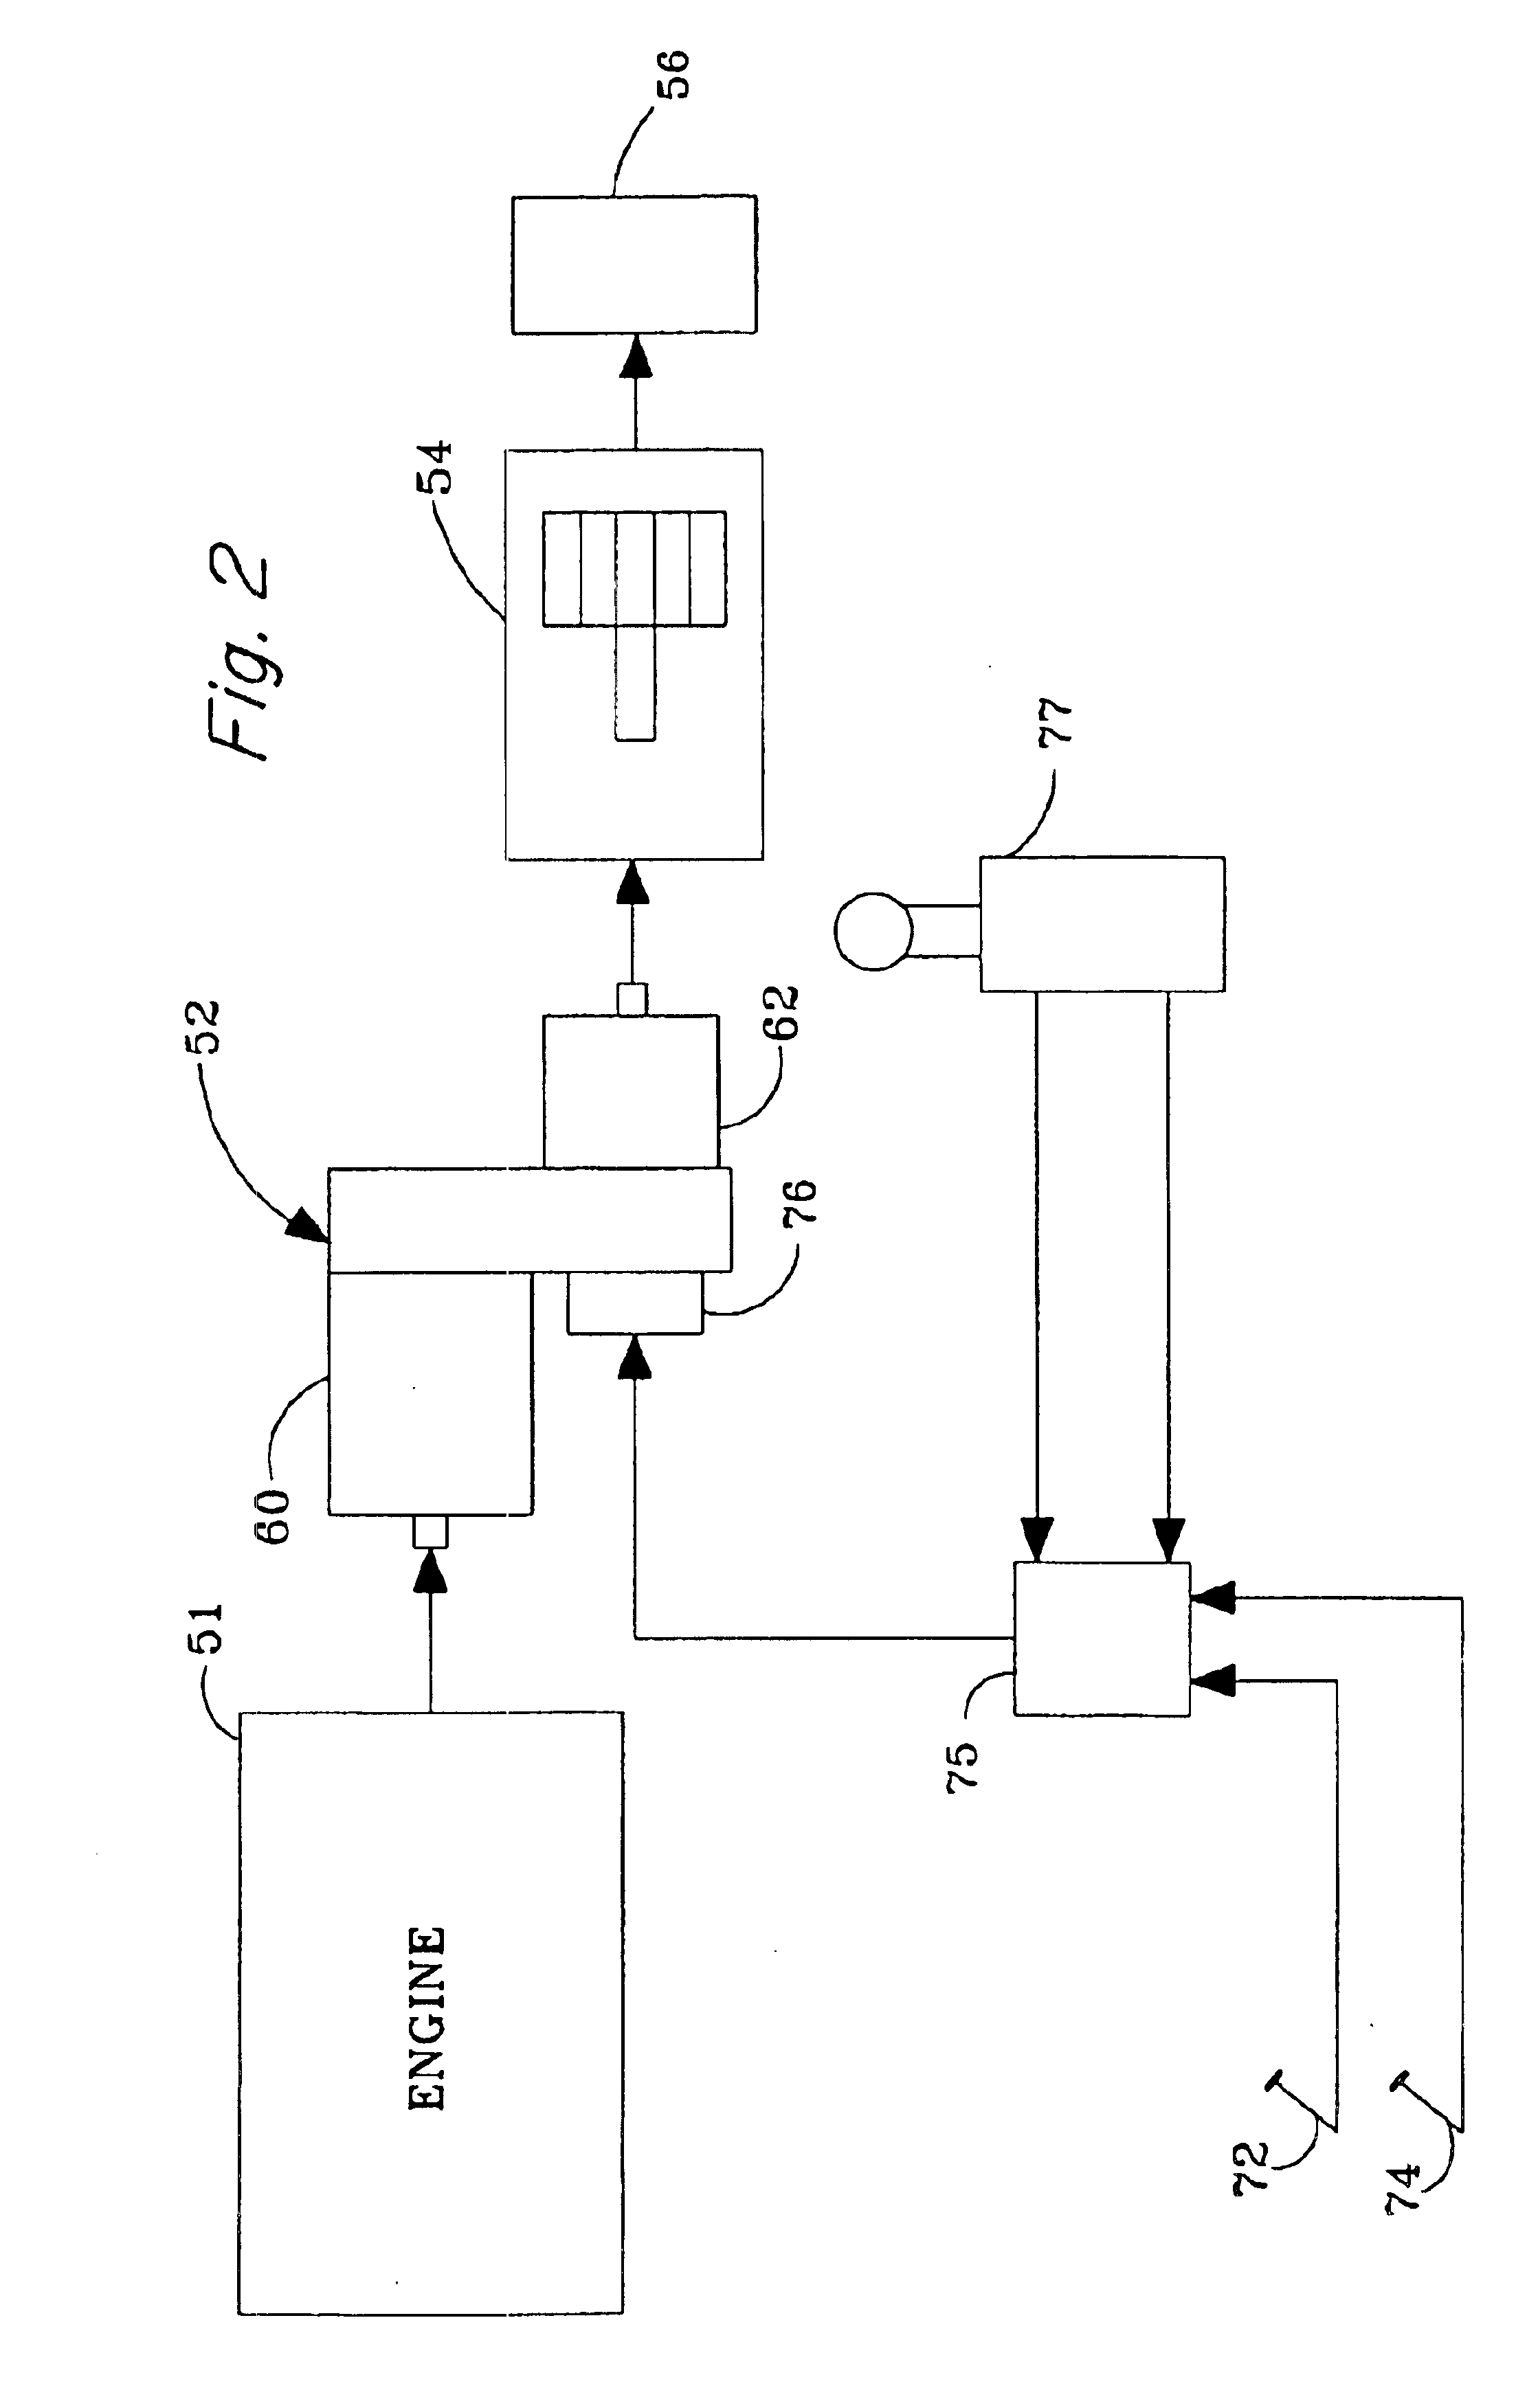 Speed control for utility vehicle operable from rearward-facing seat